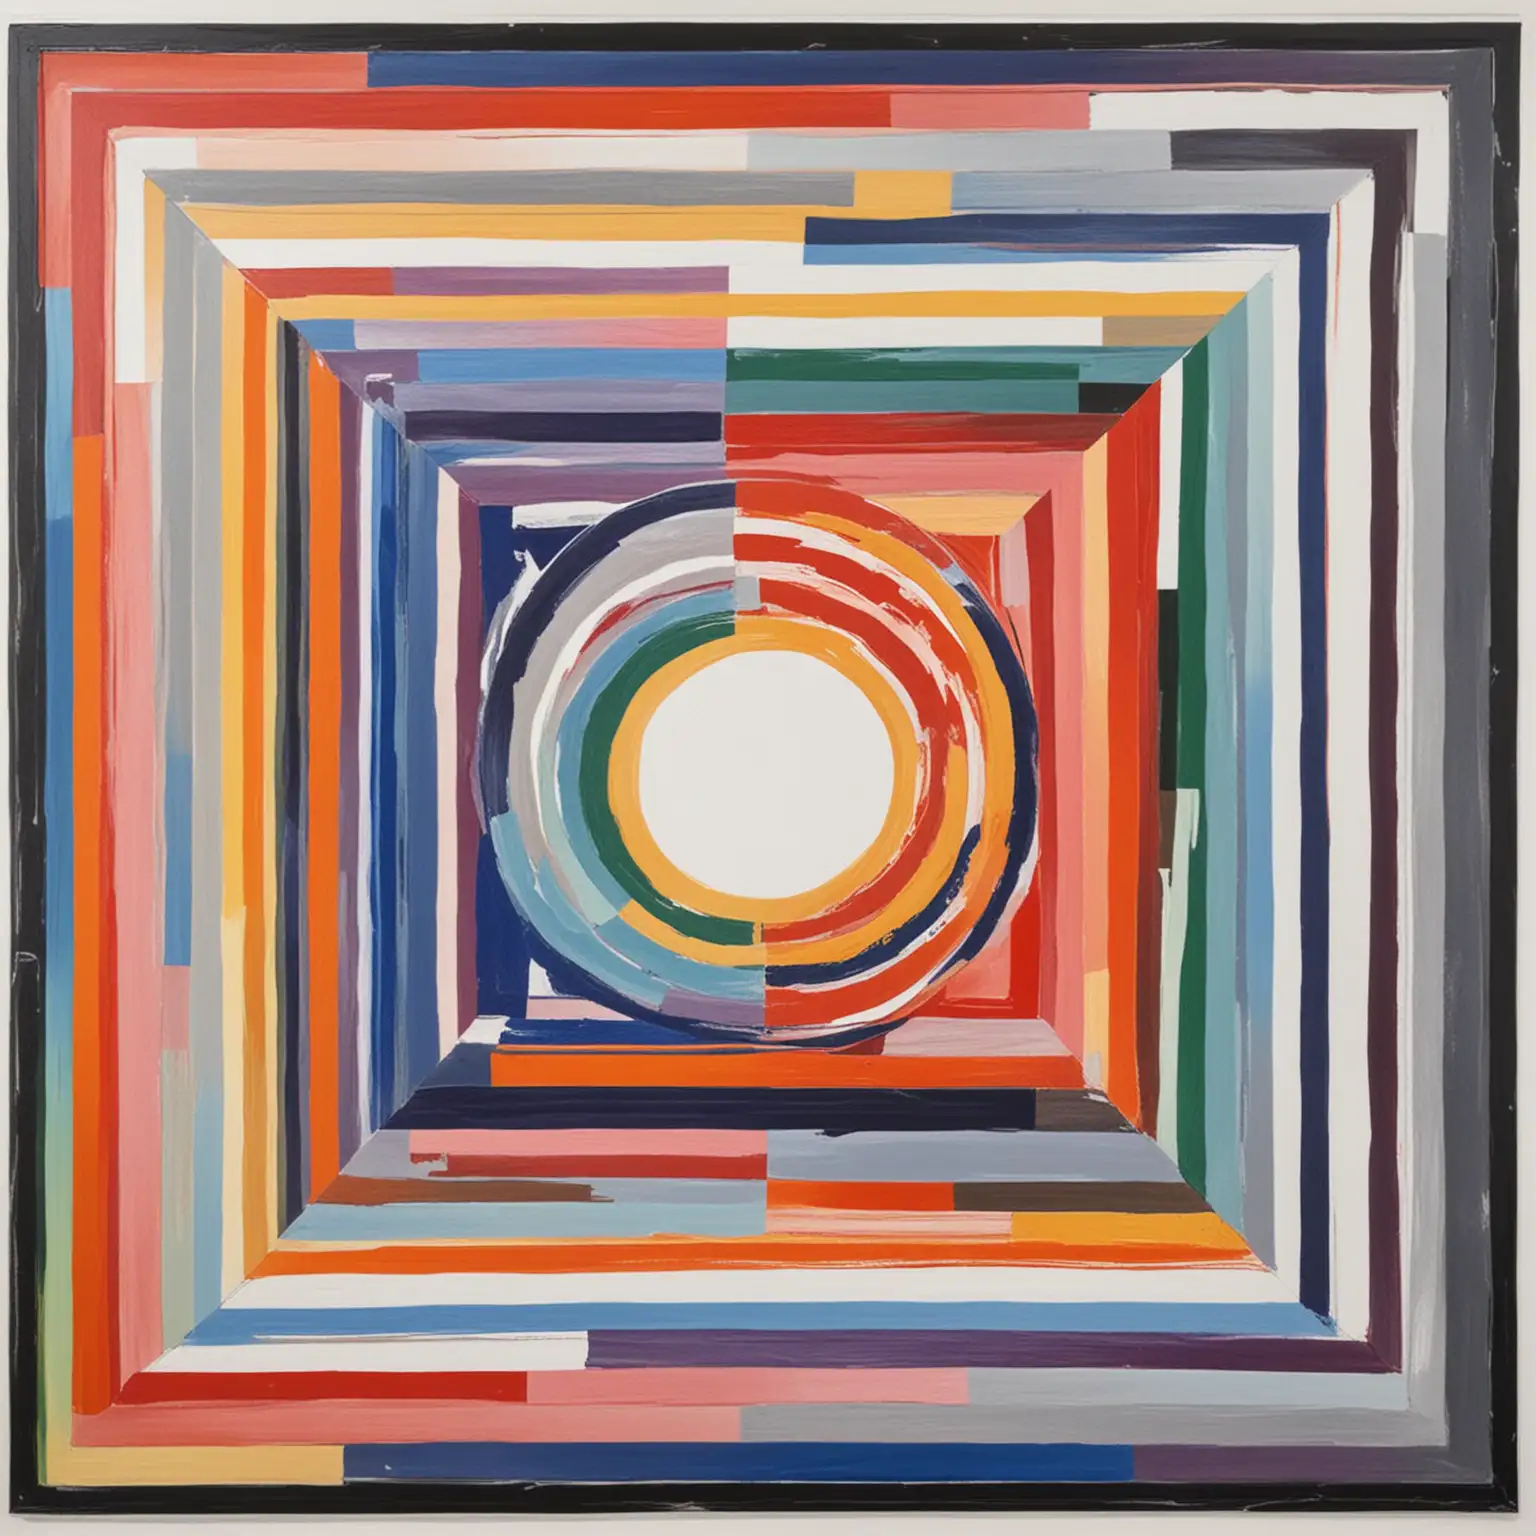 In the style of Frank Stella create an abstract image with very sharp definitive lines of square and circle and  using bright primary colors and white